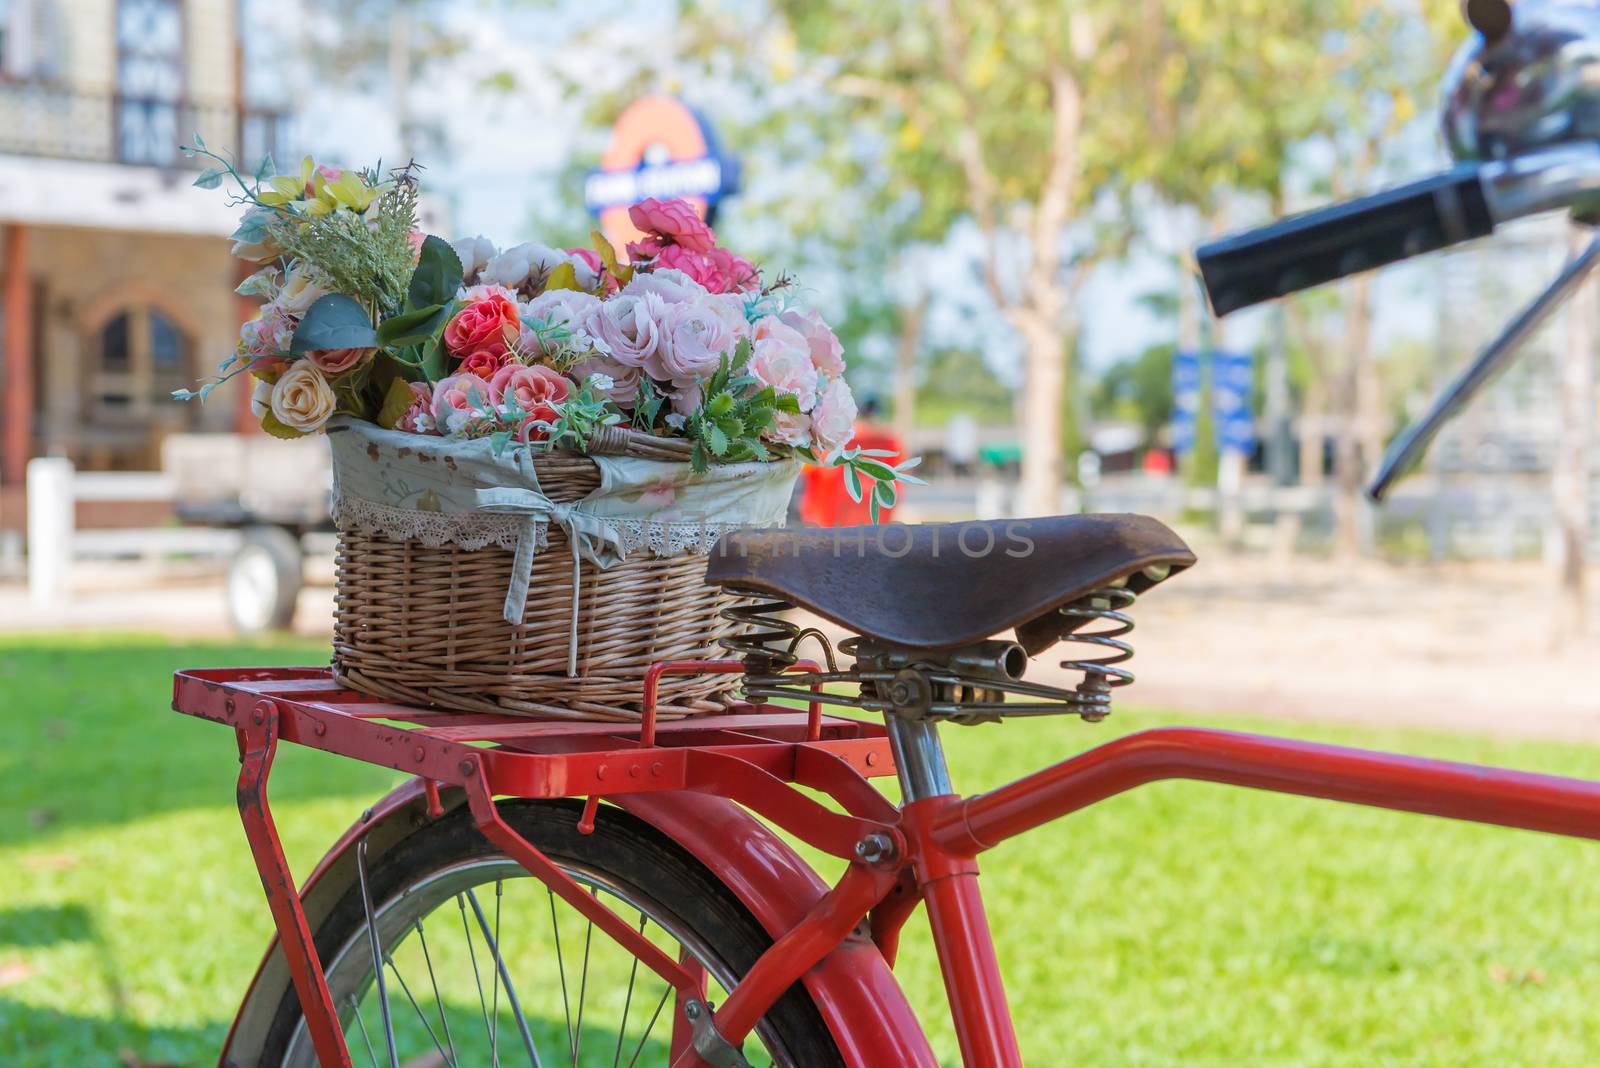 vintage bicycle equipped with basket of flowers in the garden by casanowe